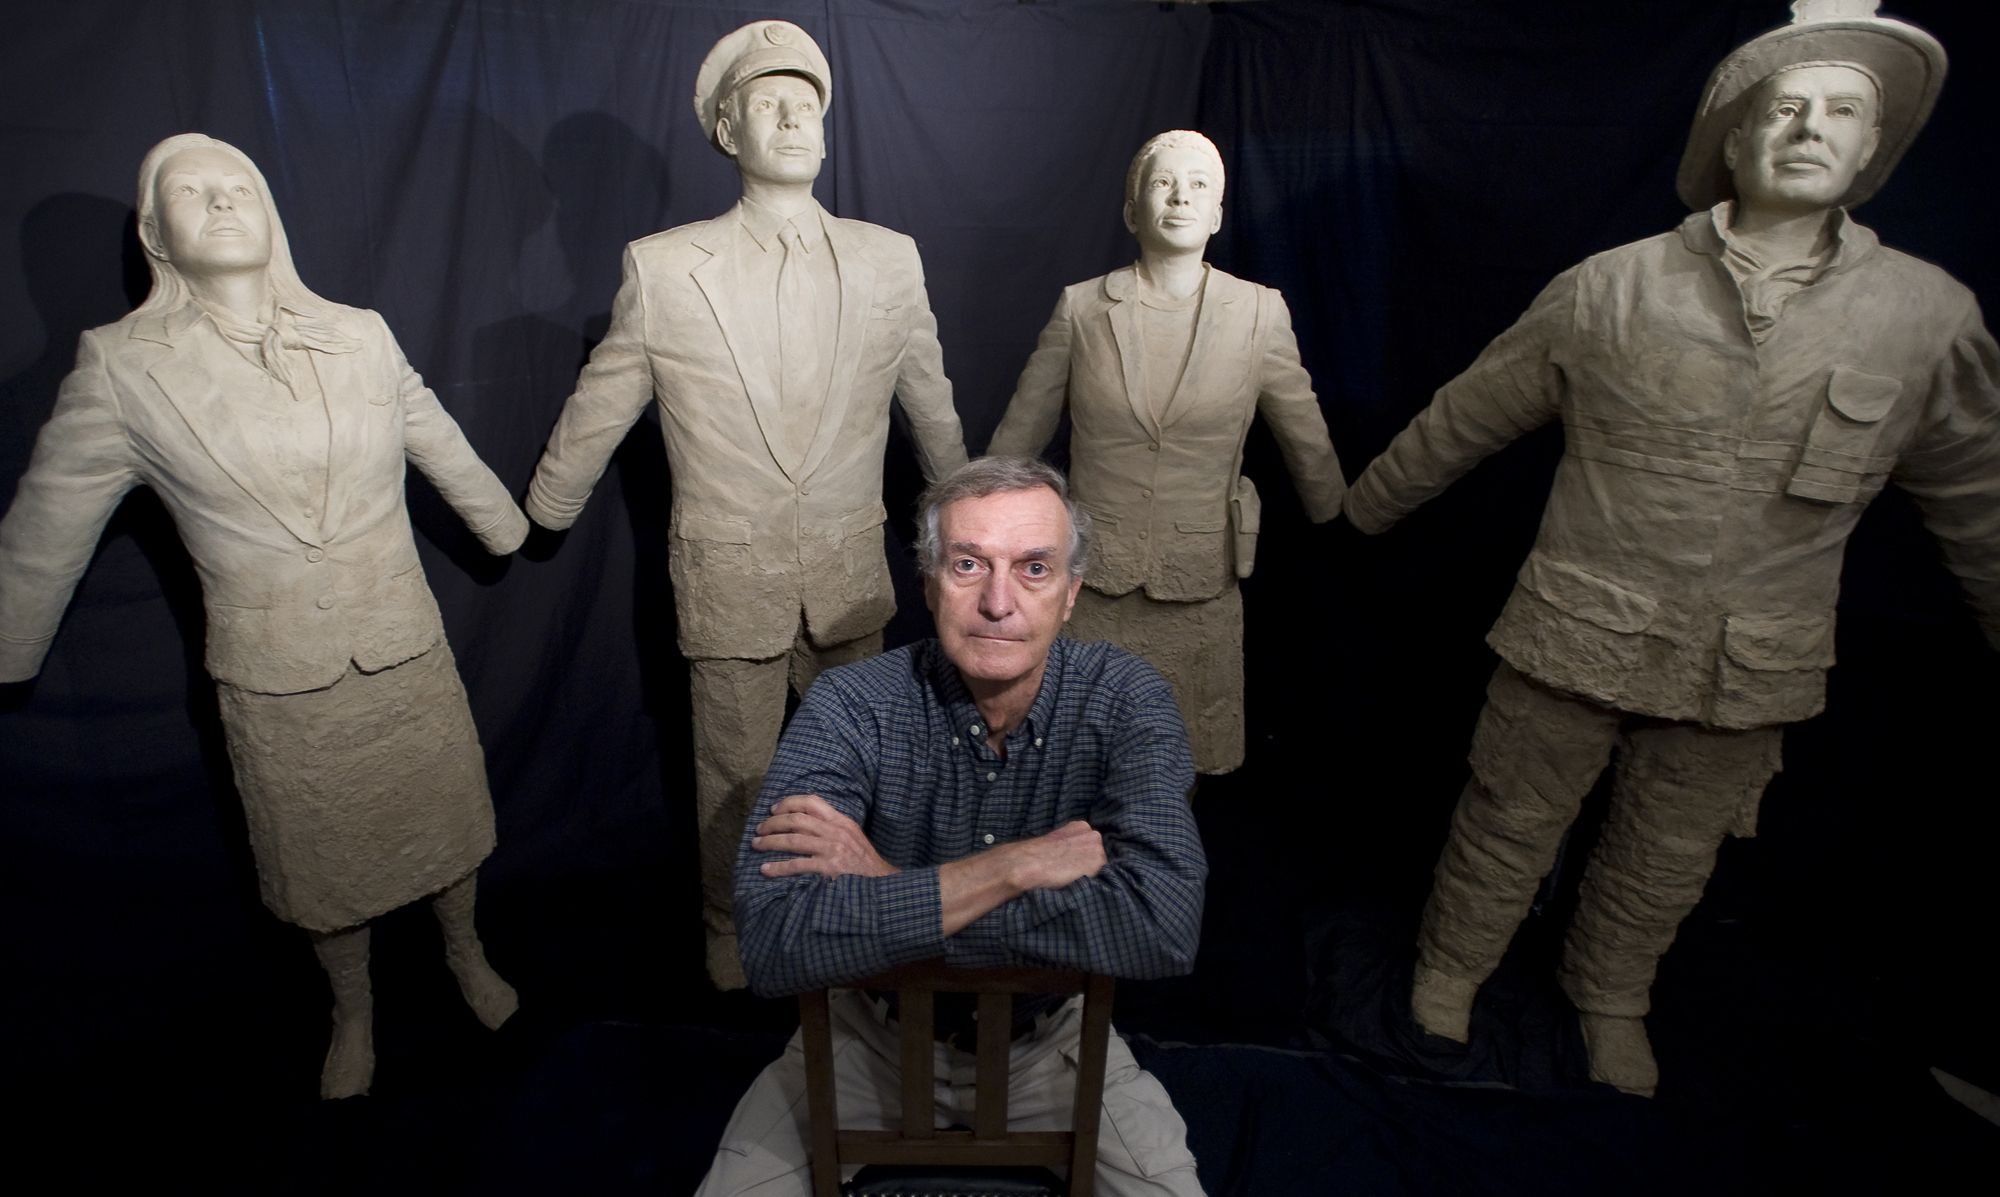 Battle Ground artist Jim Demetro poses in front of four clay figures that commemorate 9/11.